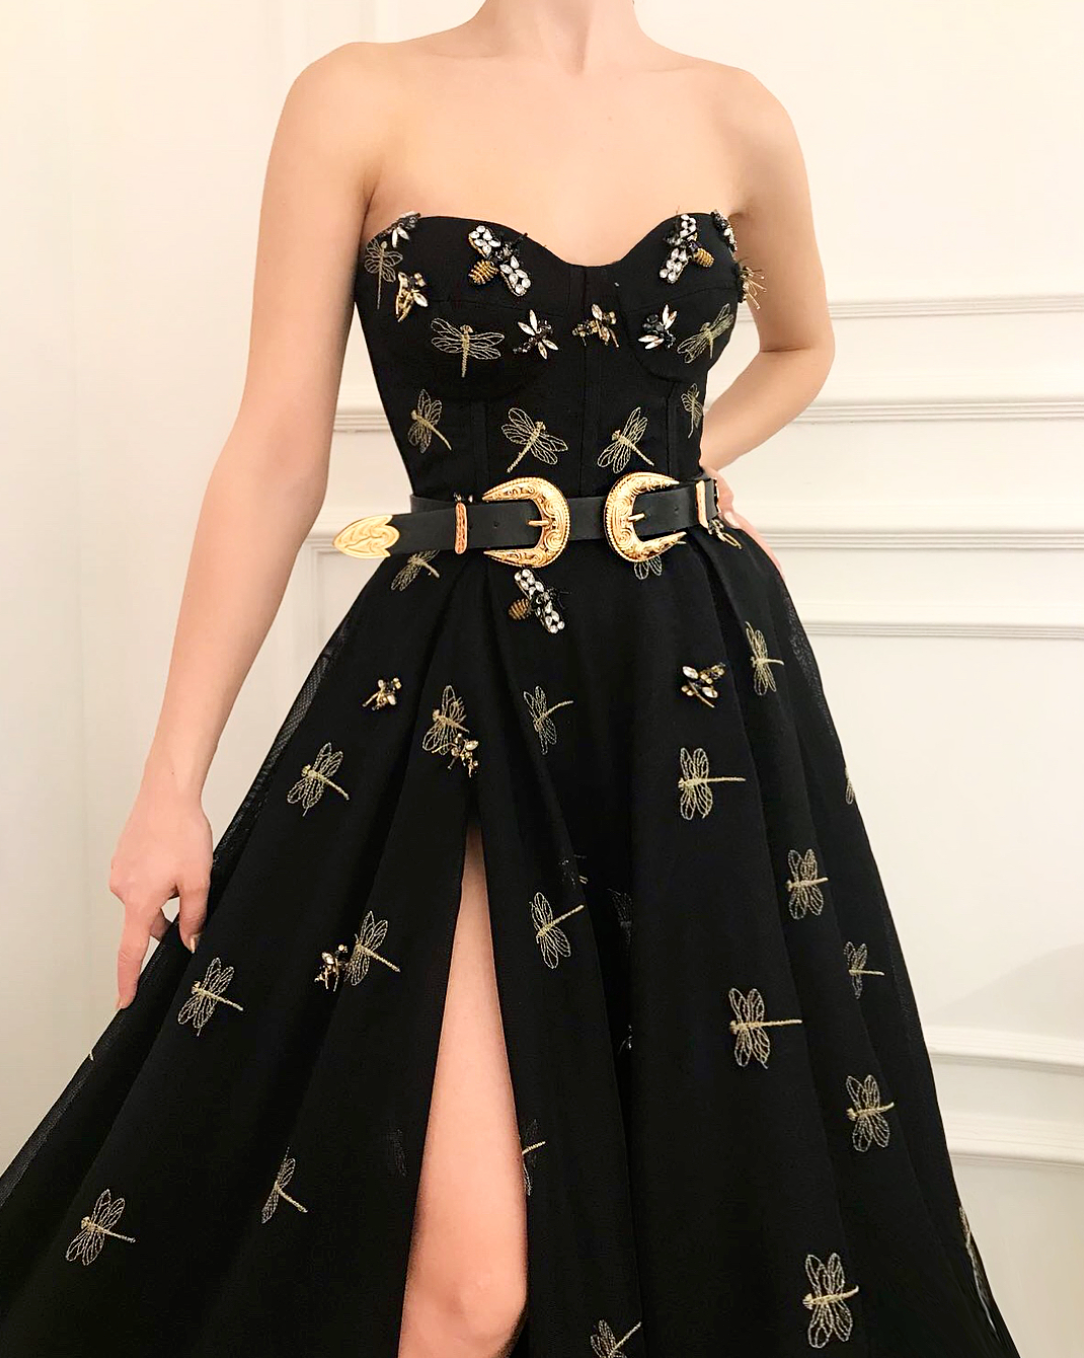 Black A-Line dress with no sleeves, belt and embroidery